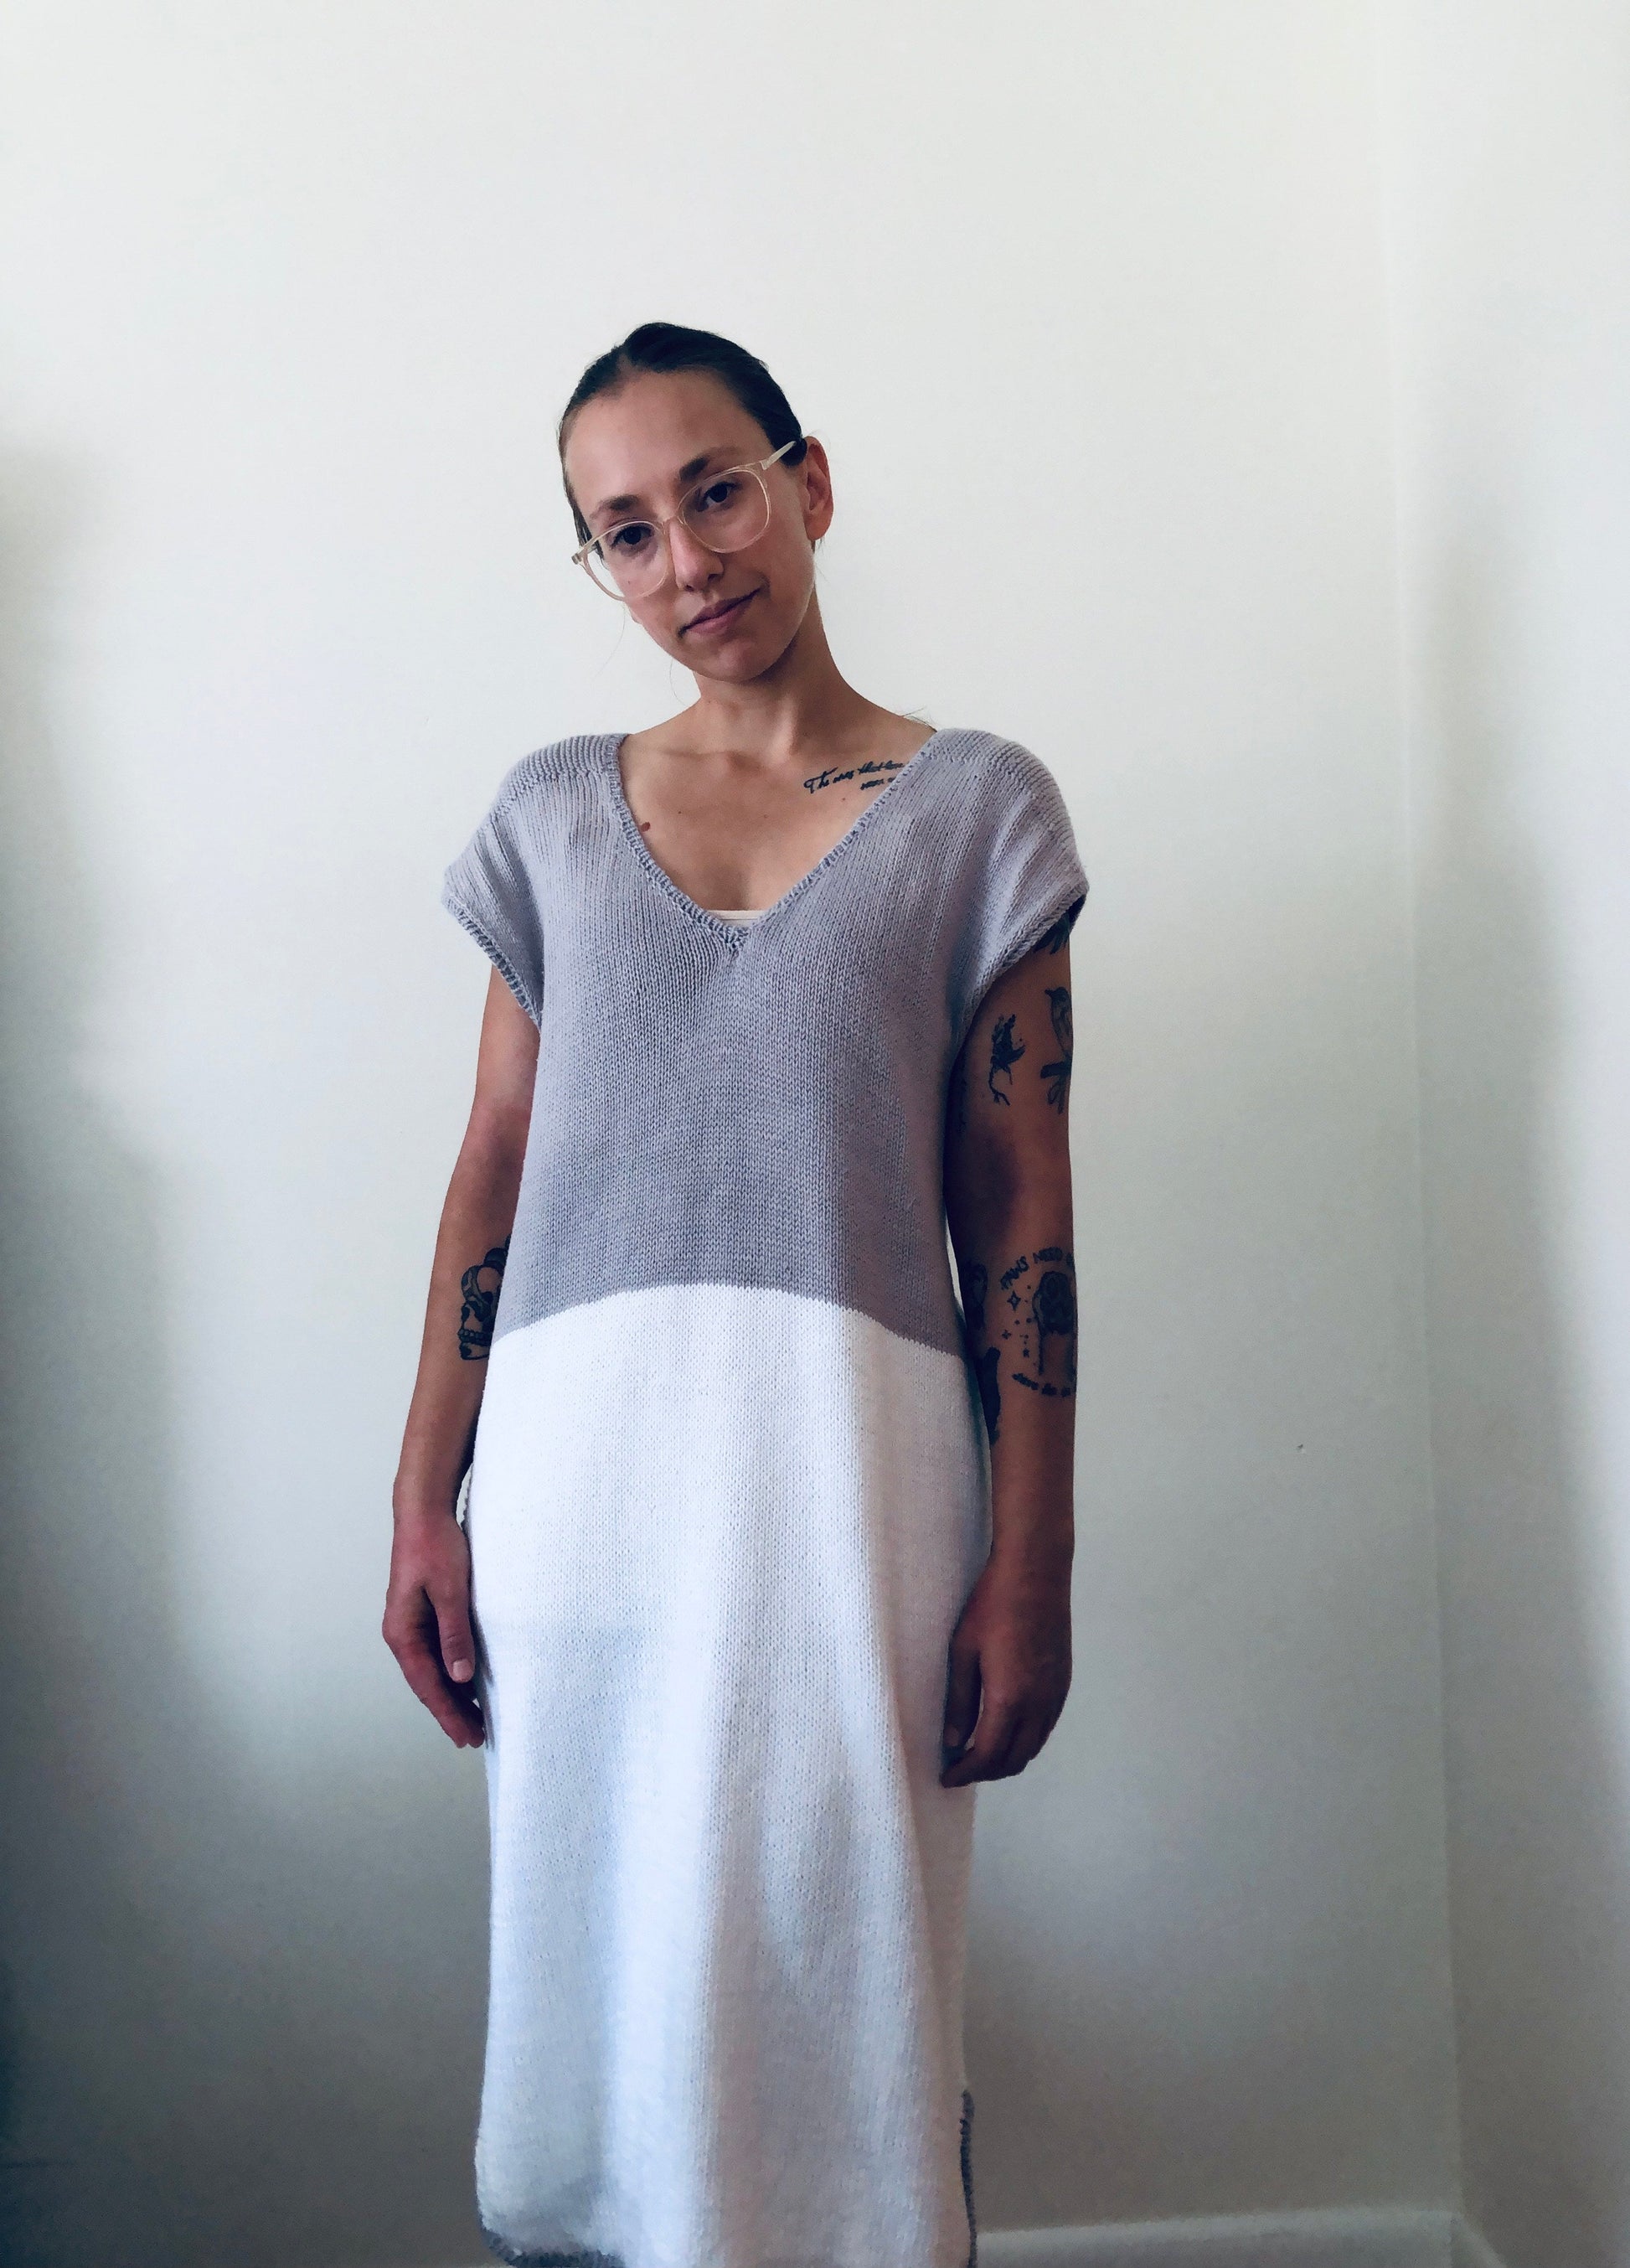 A woman stands, smiling at the camera, wearing a white and grey hand knit dress. The dress has a scoop neck and short sleeves.